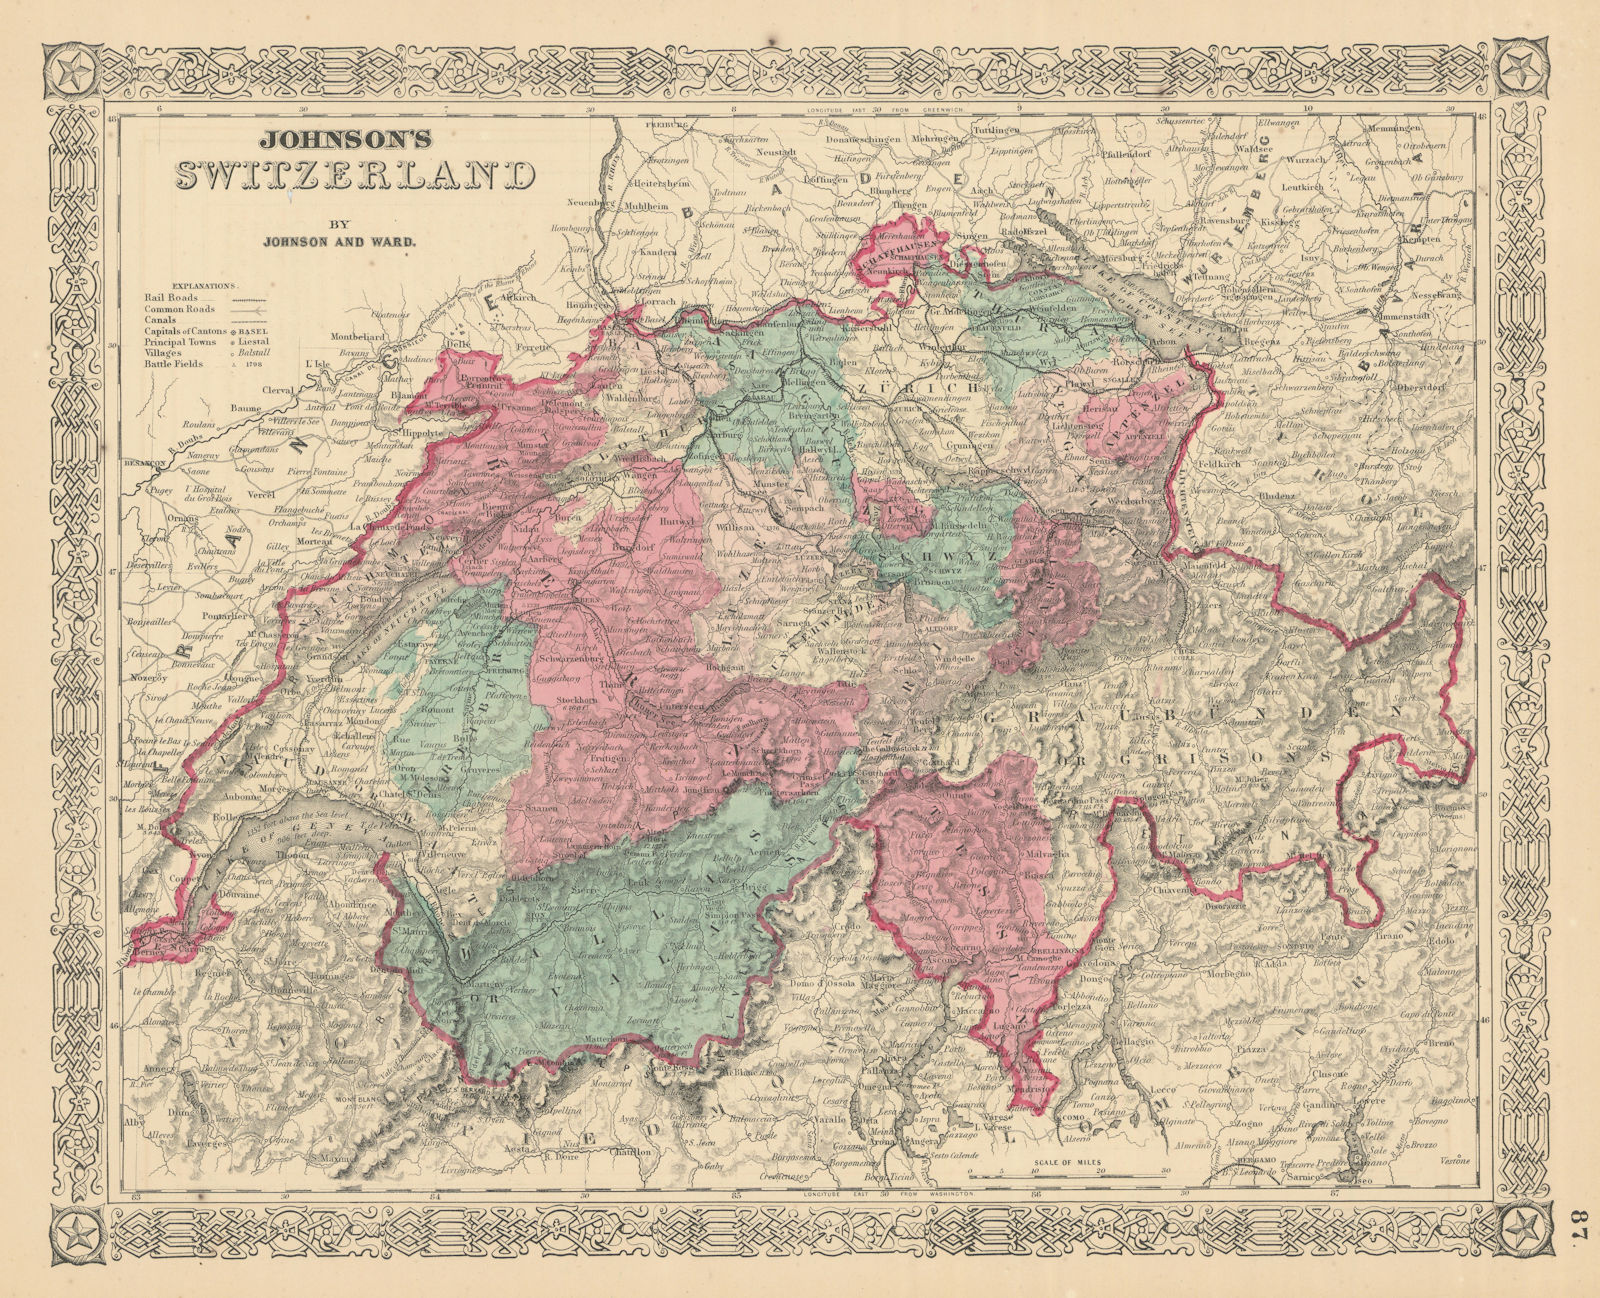 Associate Product Johnson's Switzerland in cantons 1866 old antique vintage map plan chart